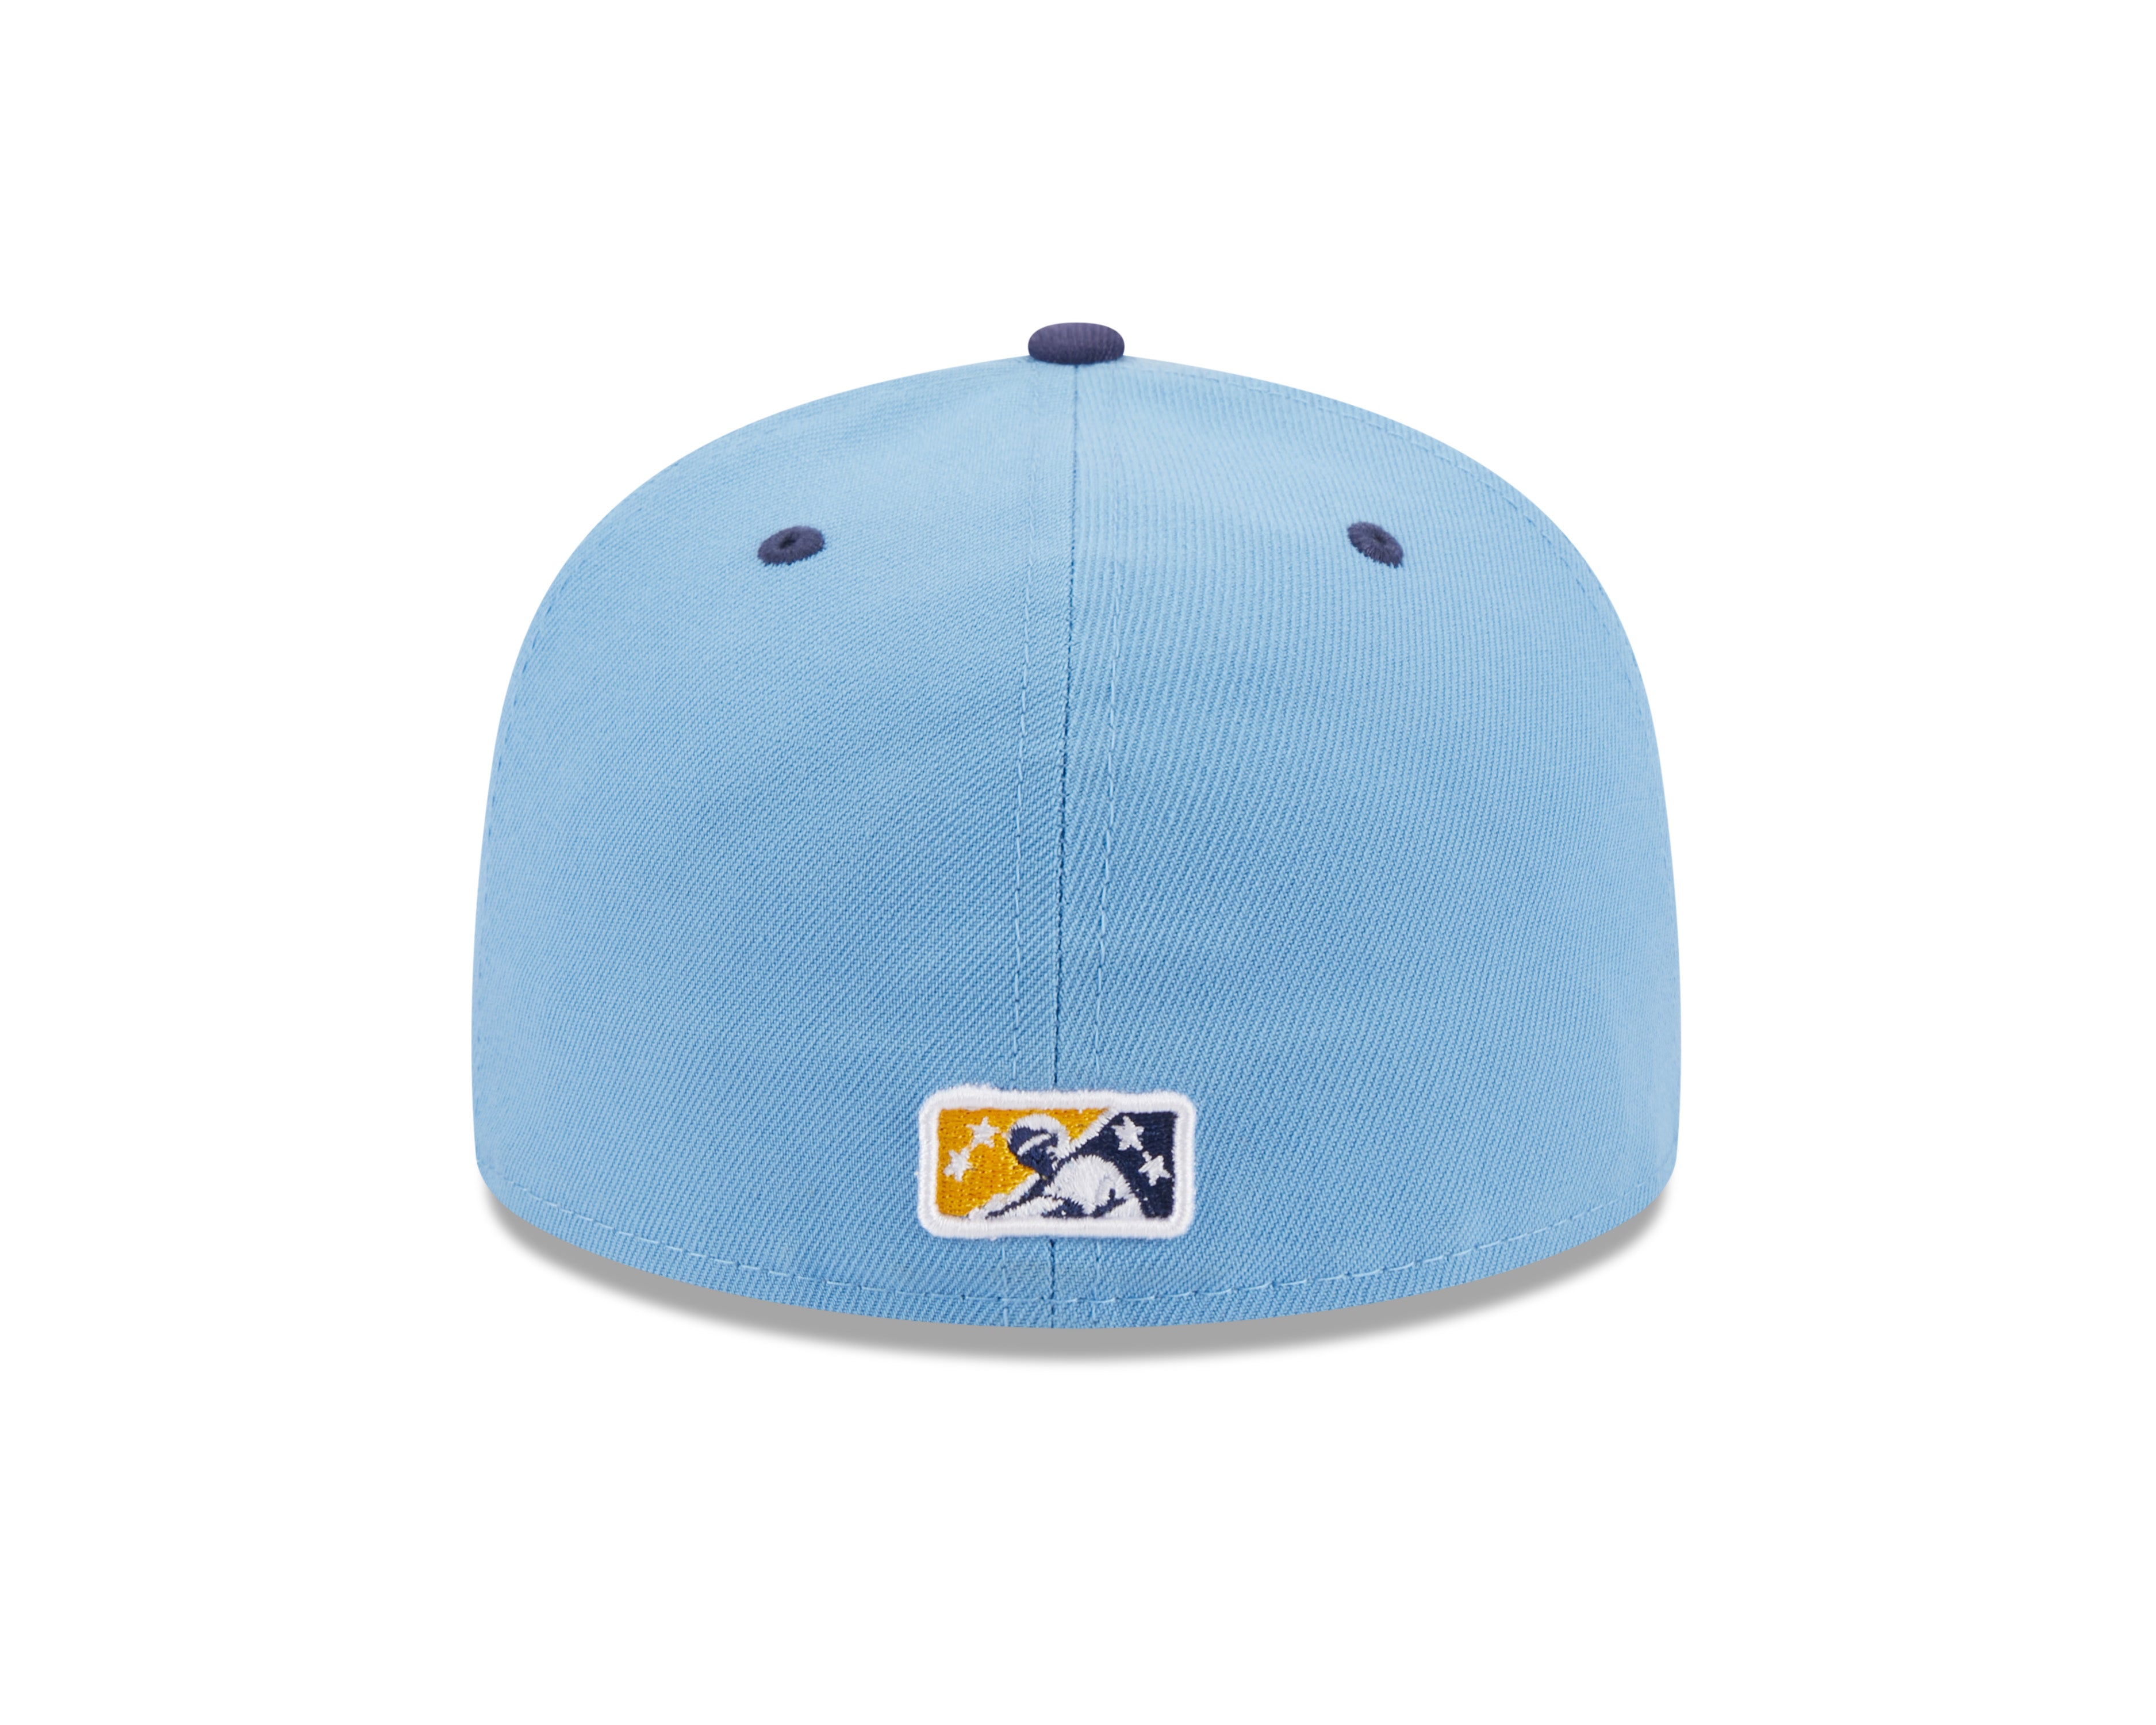 Montgomery Biscuits Official Powder Blue Fitted Hat 7 1/4